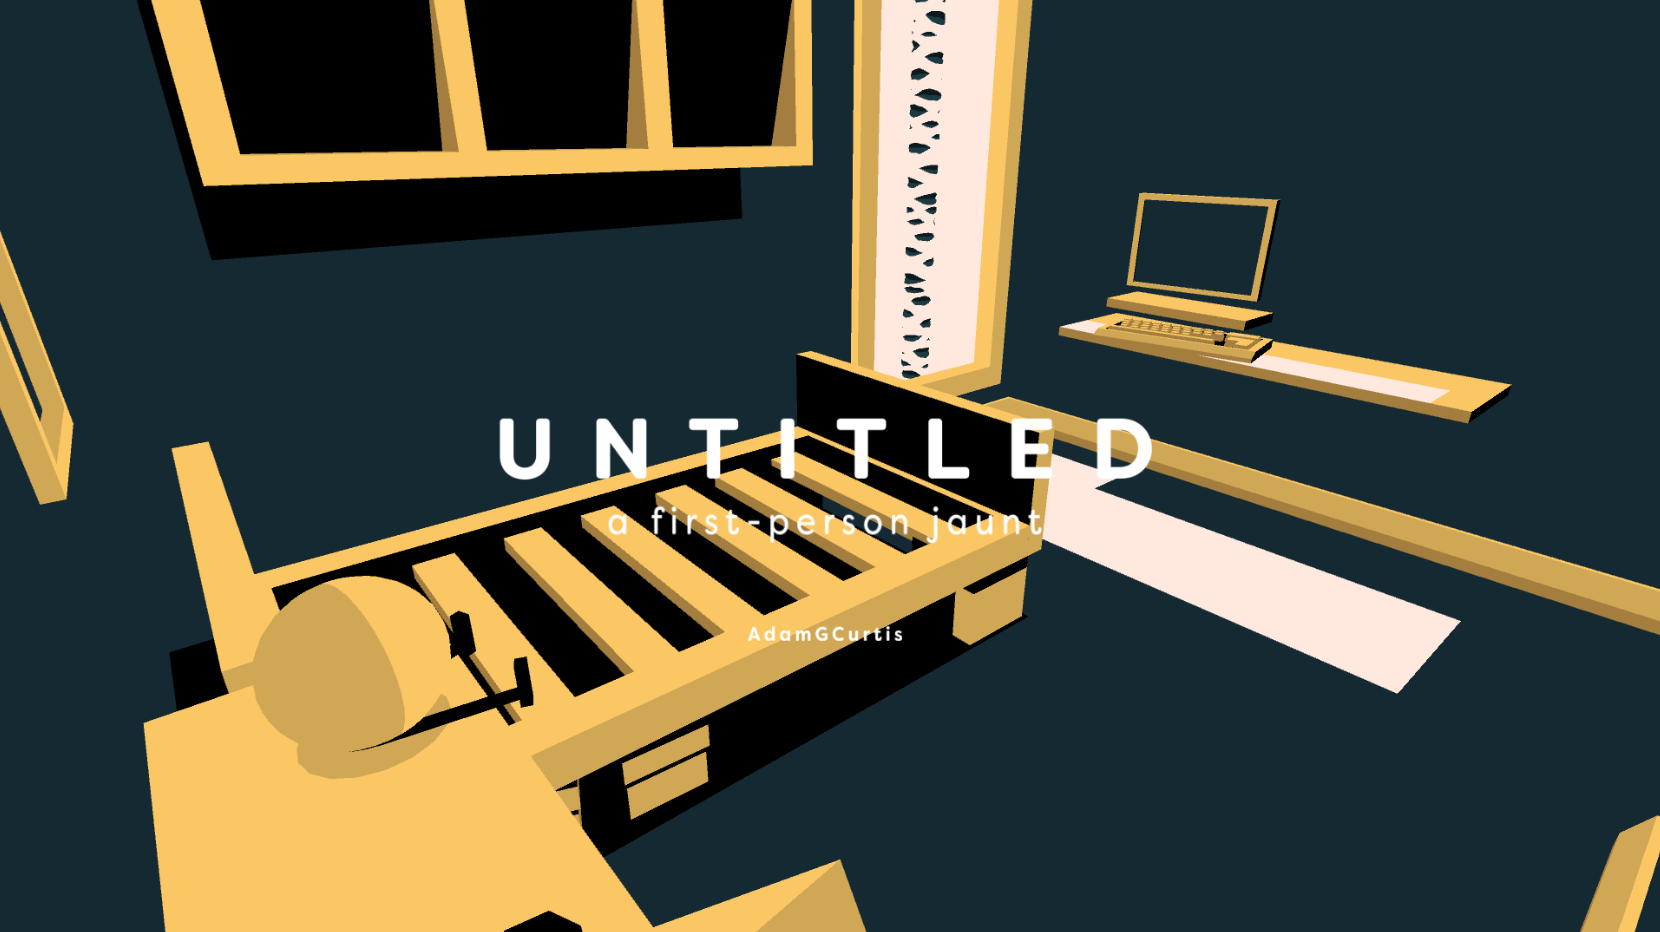 UNTITLED PREVIEW